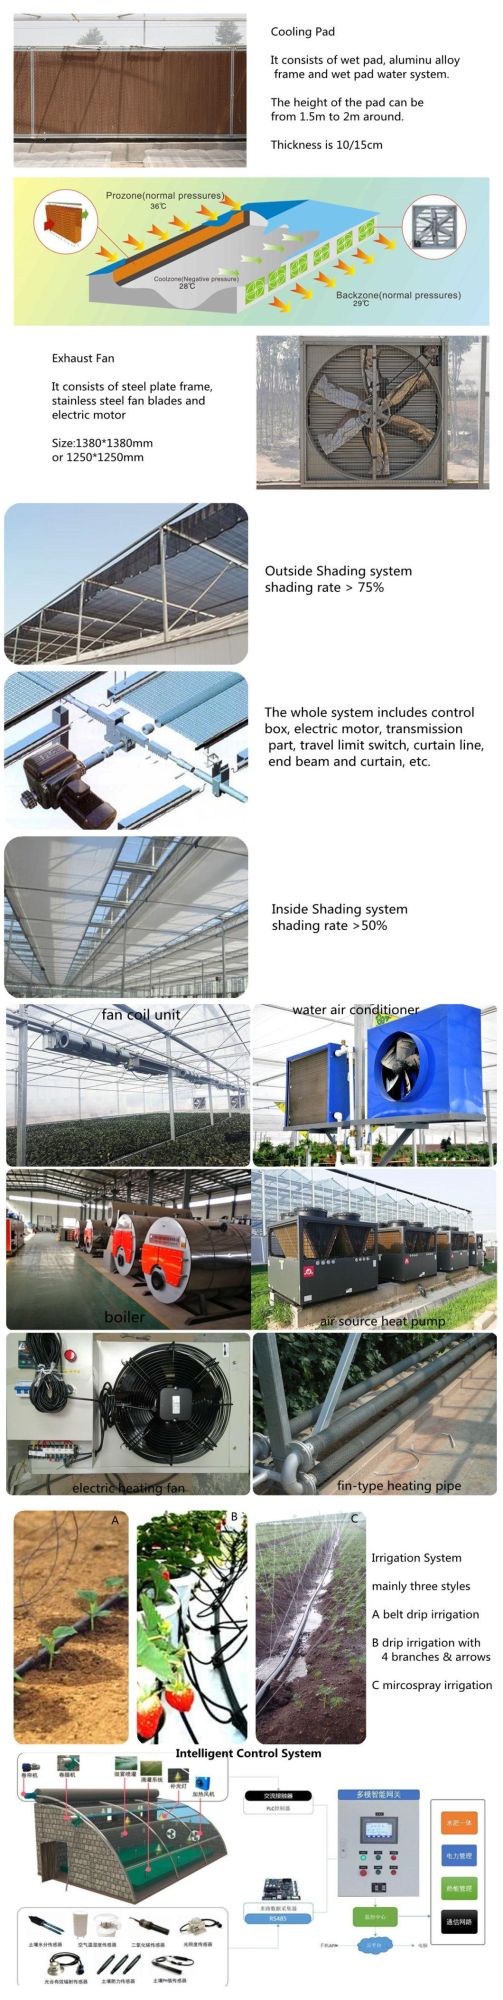 High Quality Pneumatic Seedling Machine with Watering Station and Air Compressor for Seedling Tray Seeds Sowing for Green House Agriculture